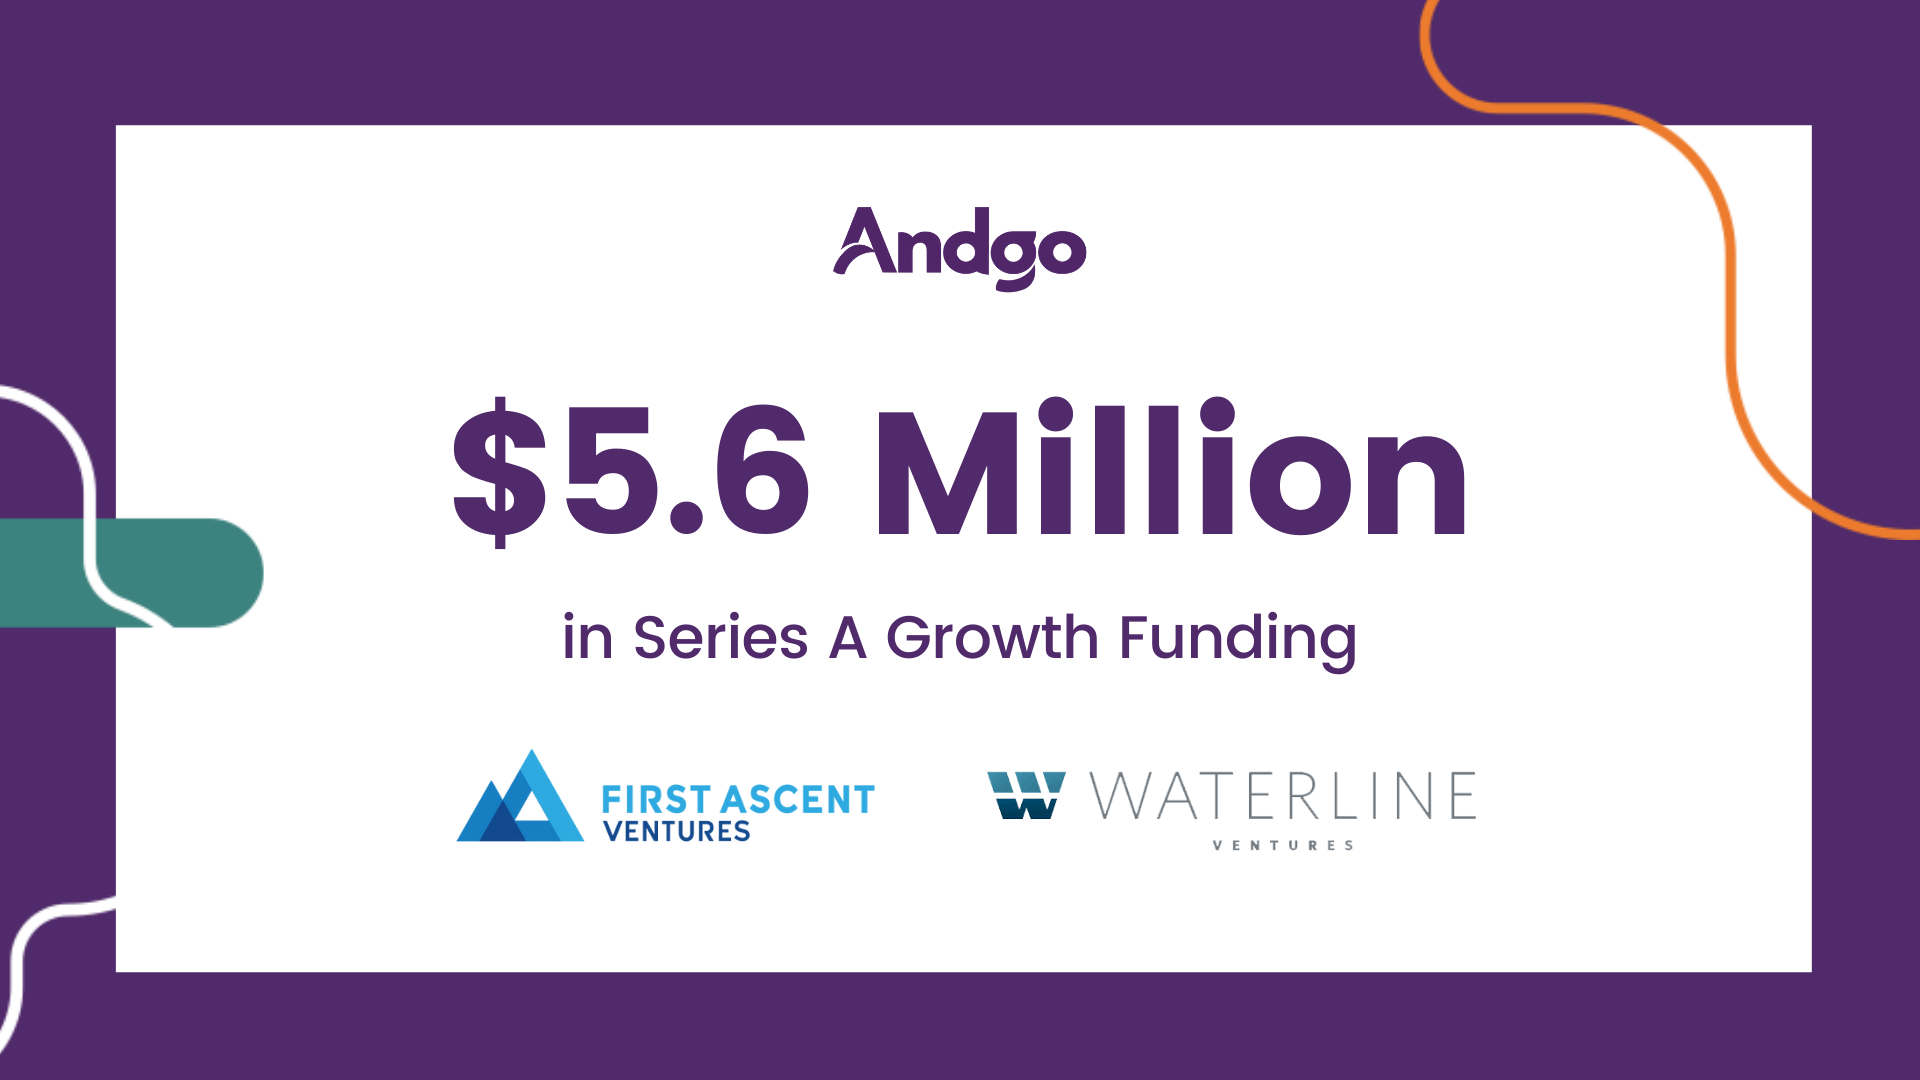 Graphic showing Andgo Systems Closes $5.6 Million Series A Funding Round, Co-Led by First Ascent Ventures and Waterline Ventures